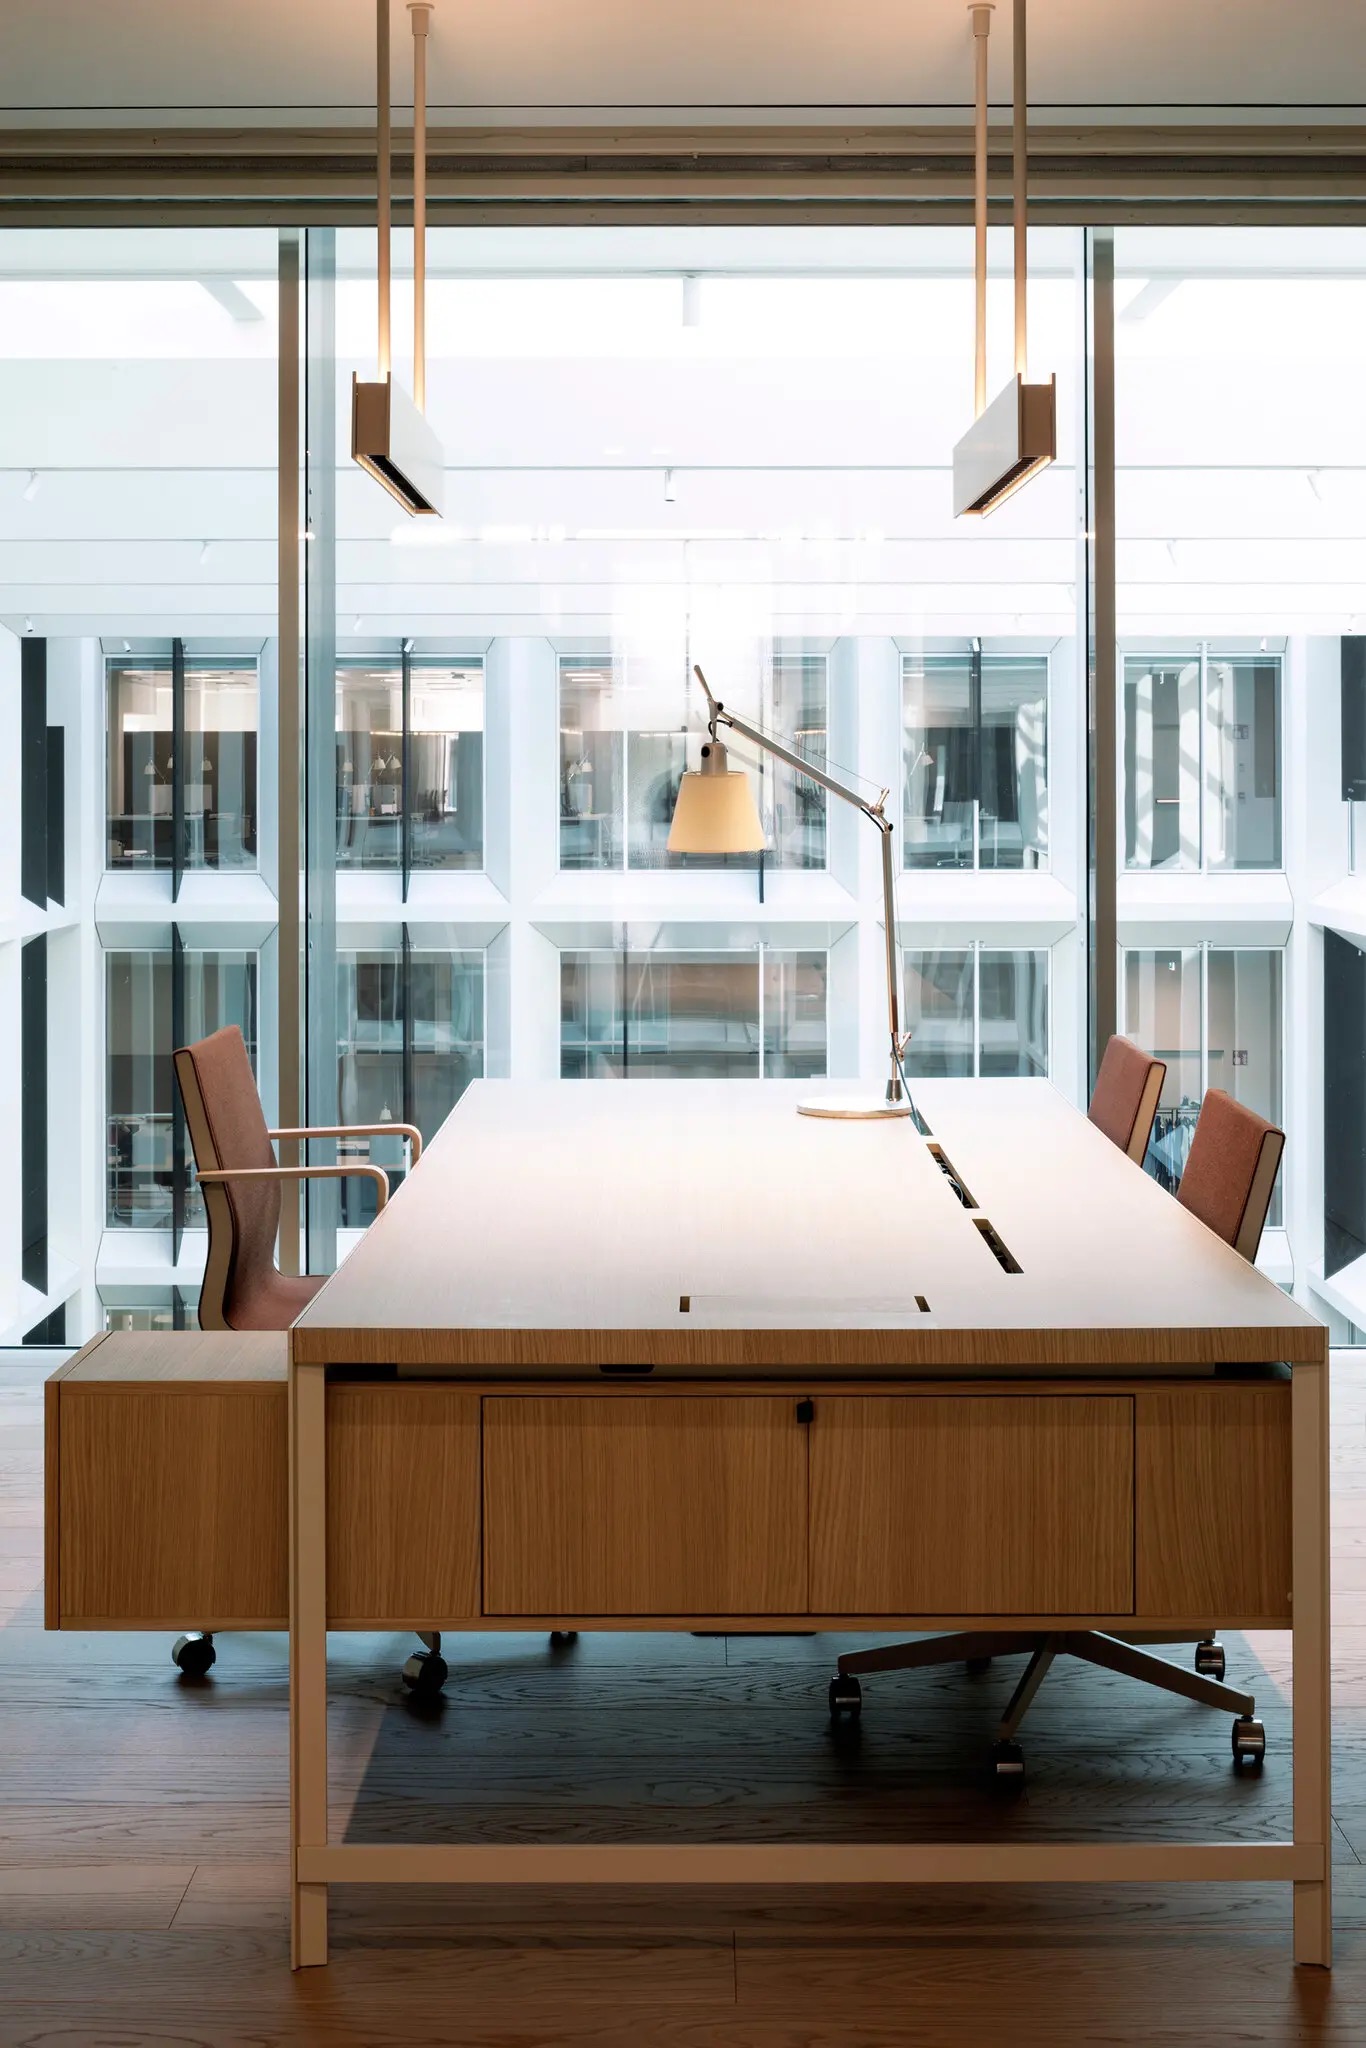 Van Duysen designed the office desks in collaboration with the Italian furniture brand Unifor. Photography by Allegra Martin.